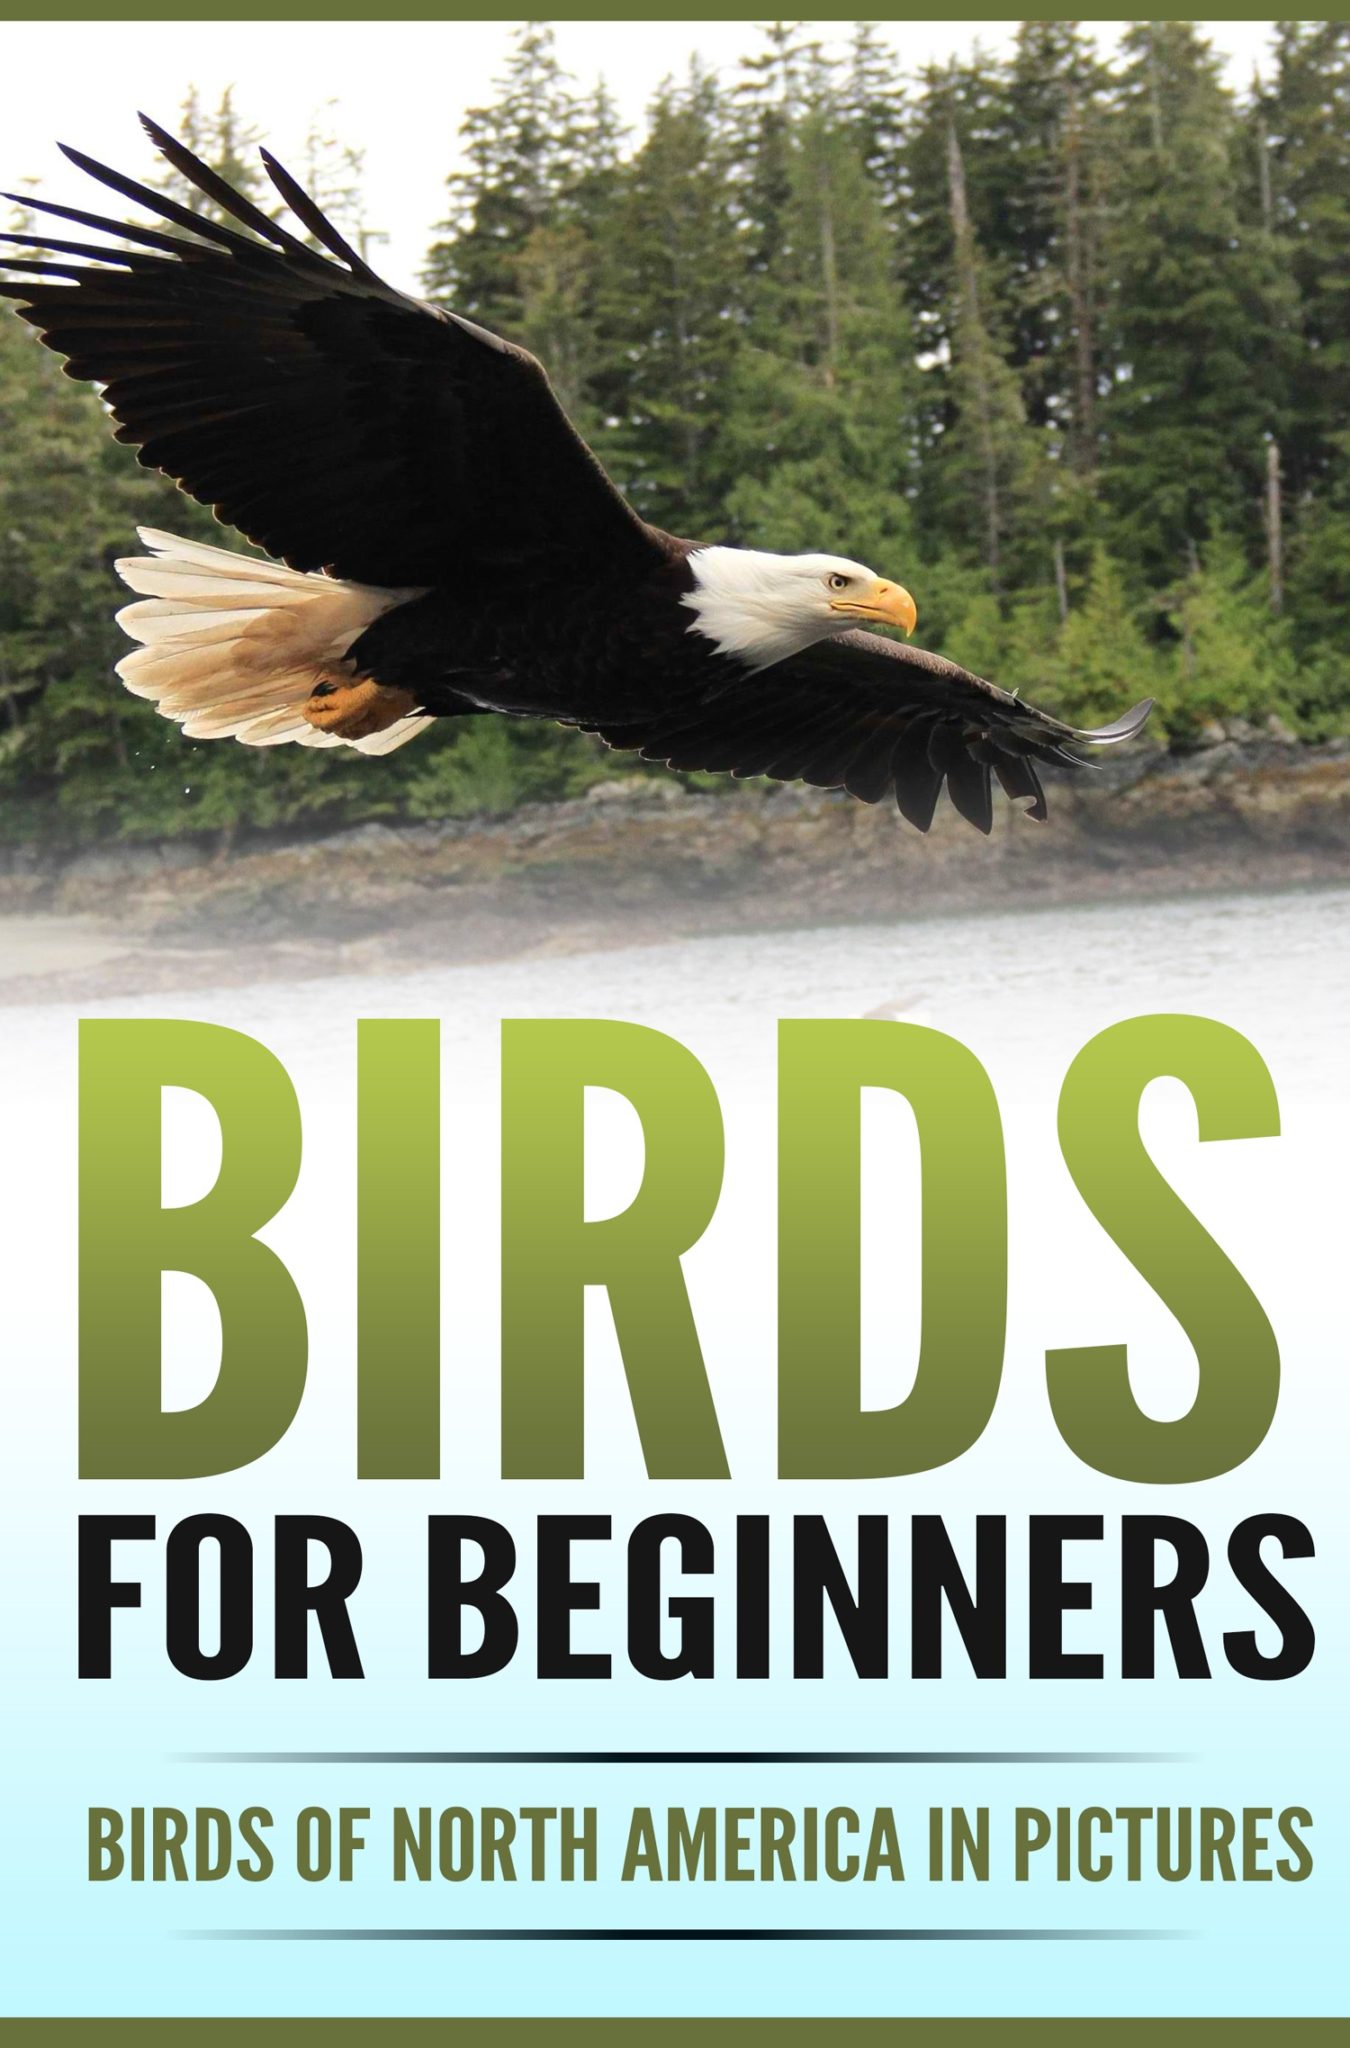 FREE: Birds for Beginners: Birds of North America in Pictures by Pippa Cloverdale